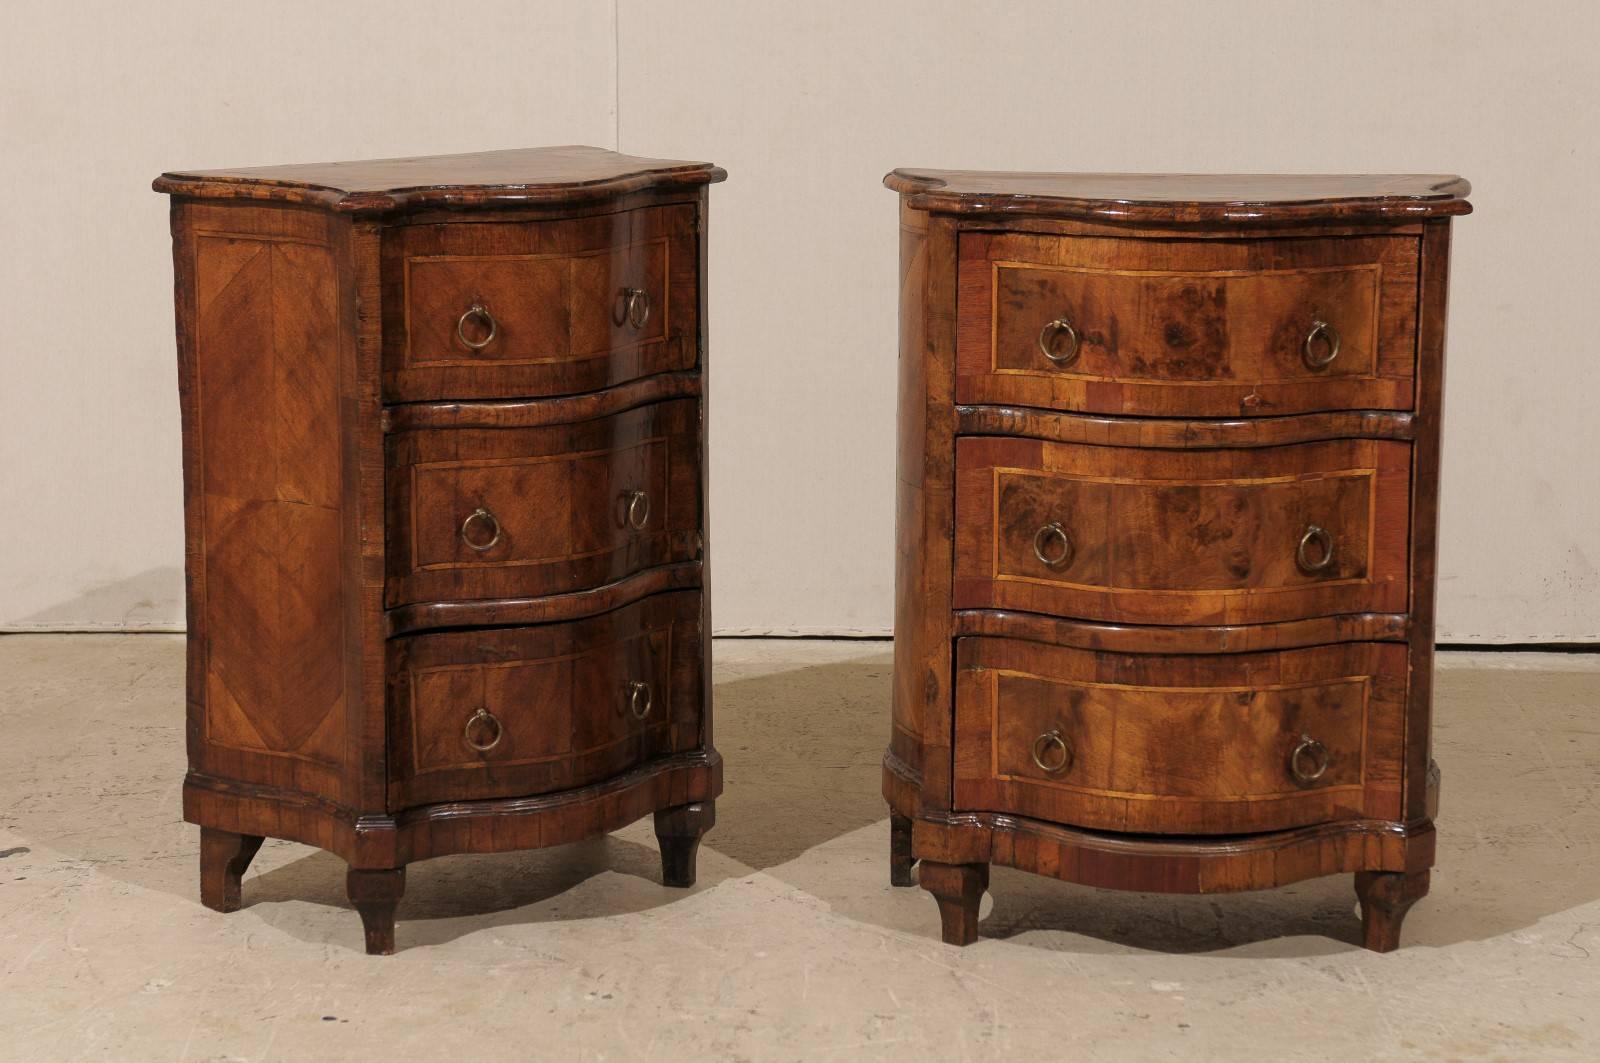 A pair of Italian early 19th century small serpentine Marquetry Commodini. These exquisite petite sized Italian chests feature three drawers with banding and ring pulls allowing the drawers to open easily. The top and sides are also inlaid with the